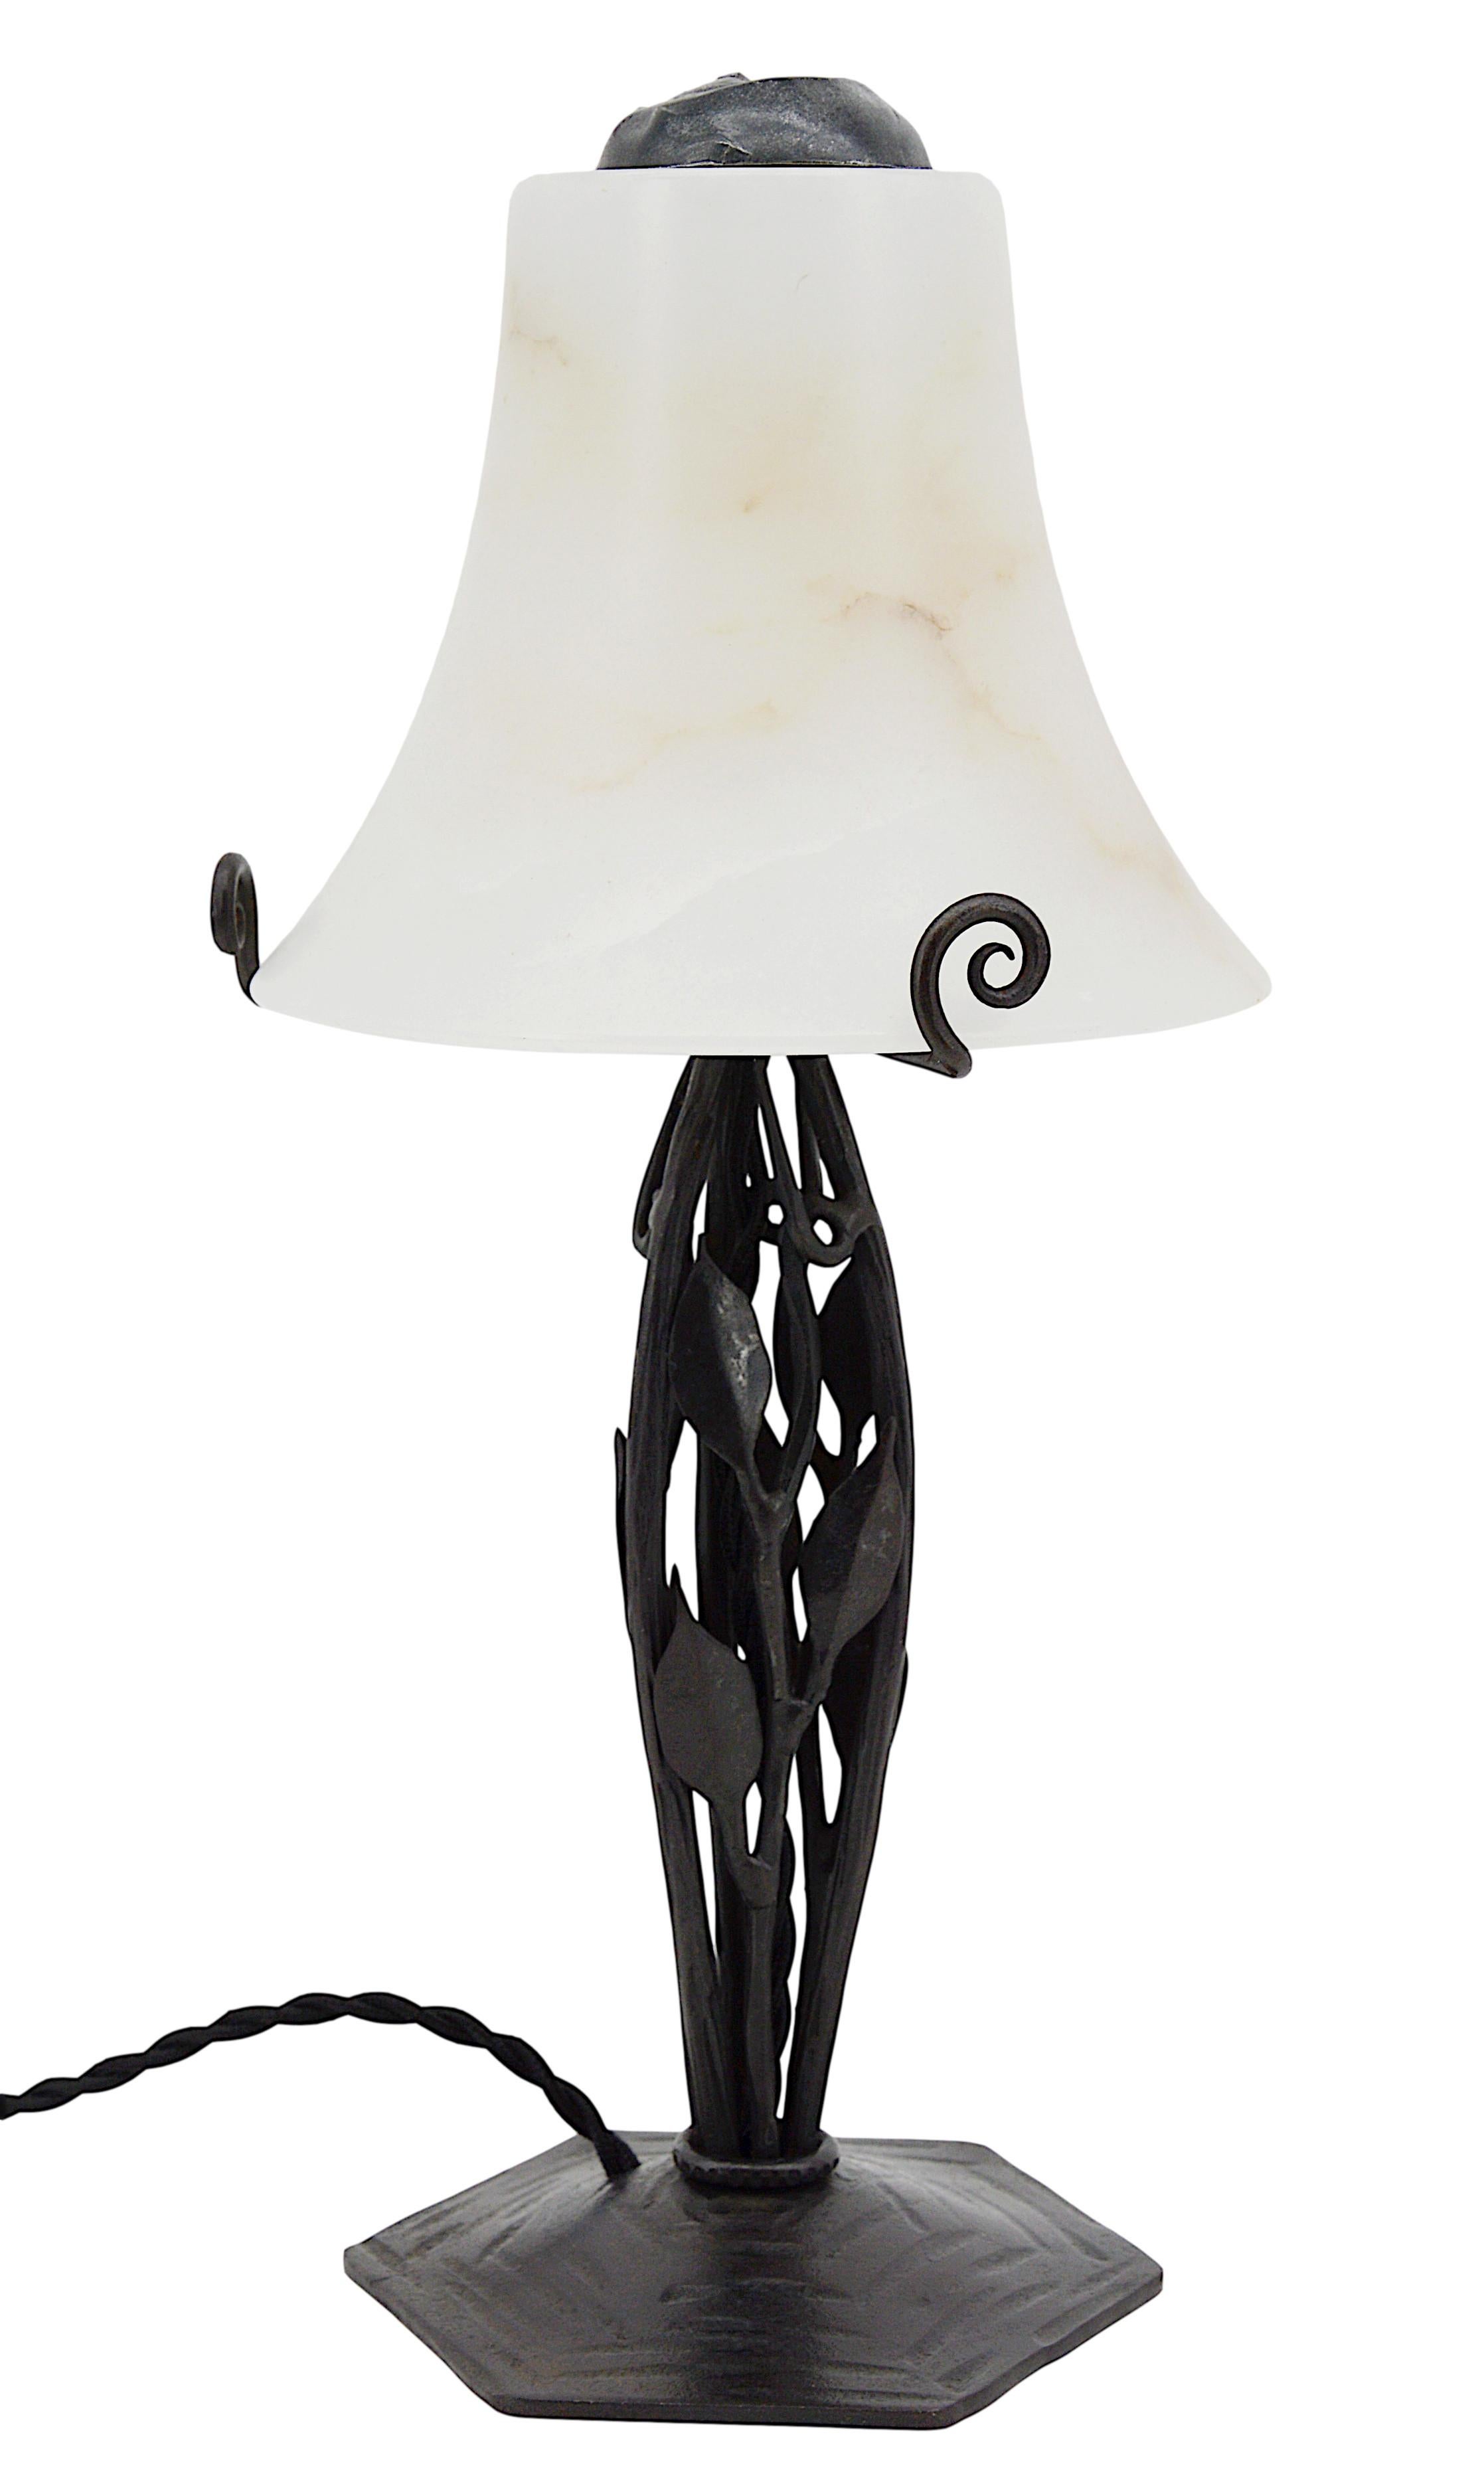 French Art Deco table lamp, France, circa 1925. Classy modernist alabaster shade on its wrought iron base. Old alabaster cannot be compared to new ones. Old alabaster has veins. Sometimes they can be mistaken for cracks. But they are not cracks,